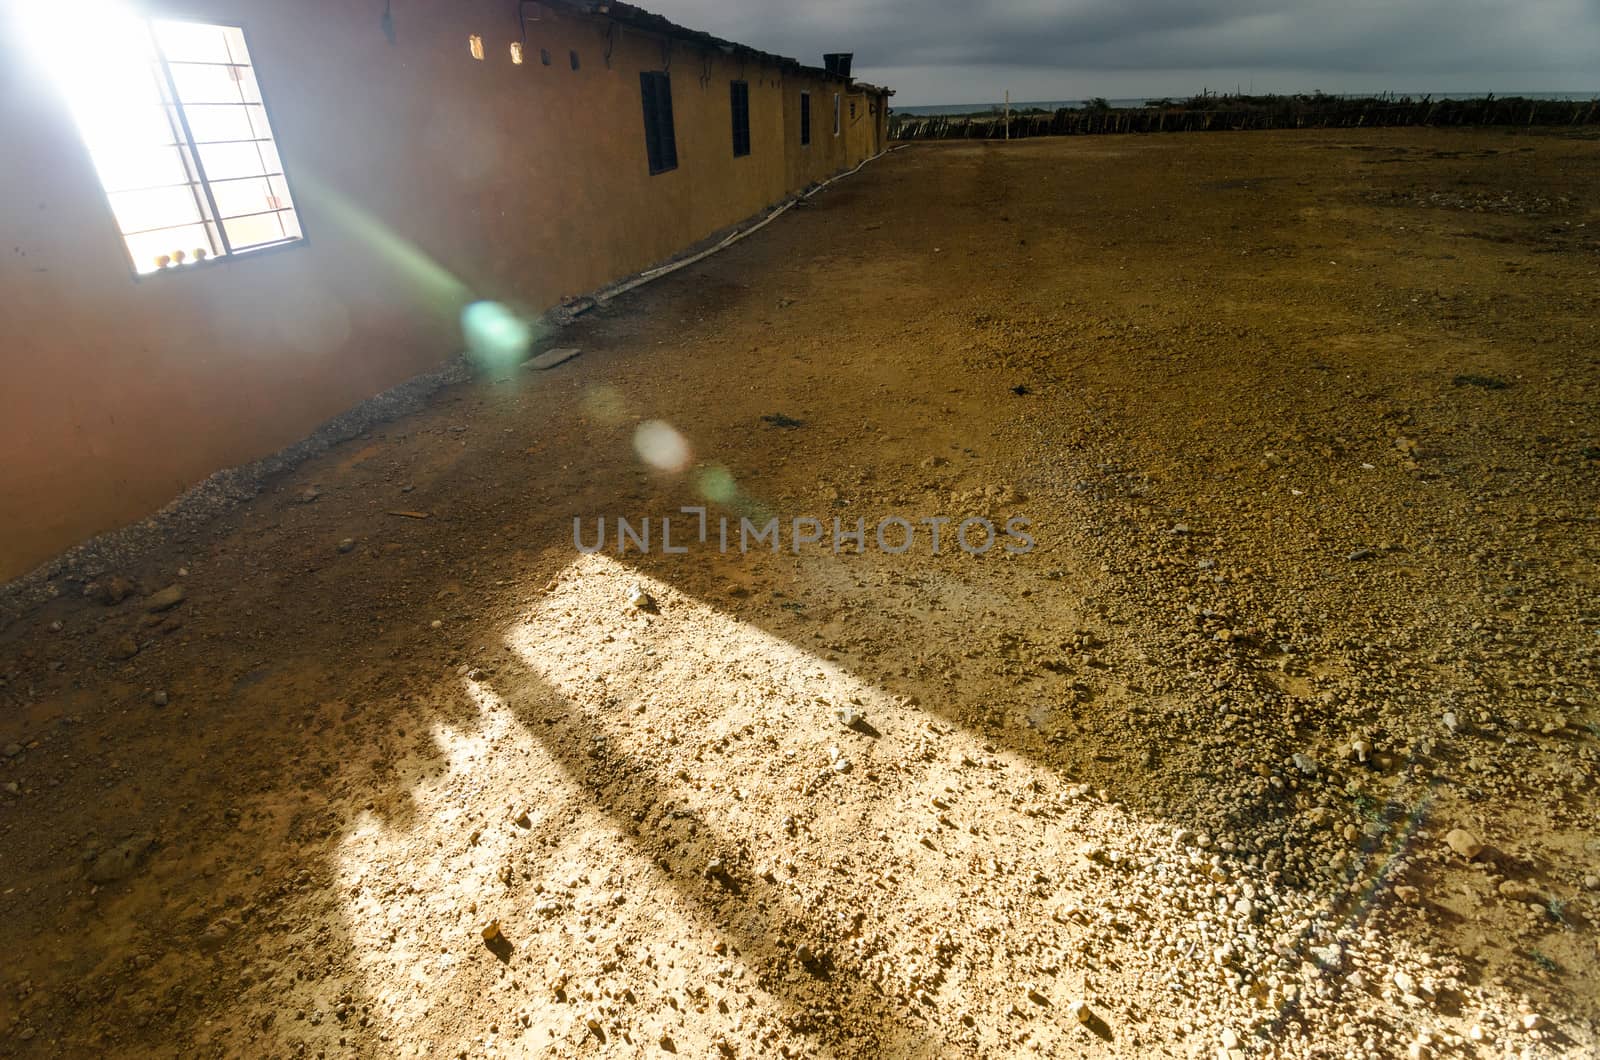 Building in a desert at nighttime with light streaming out of a window